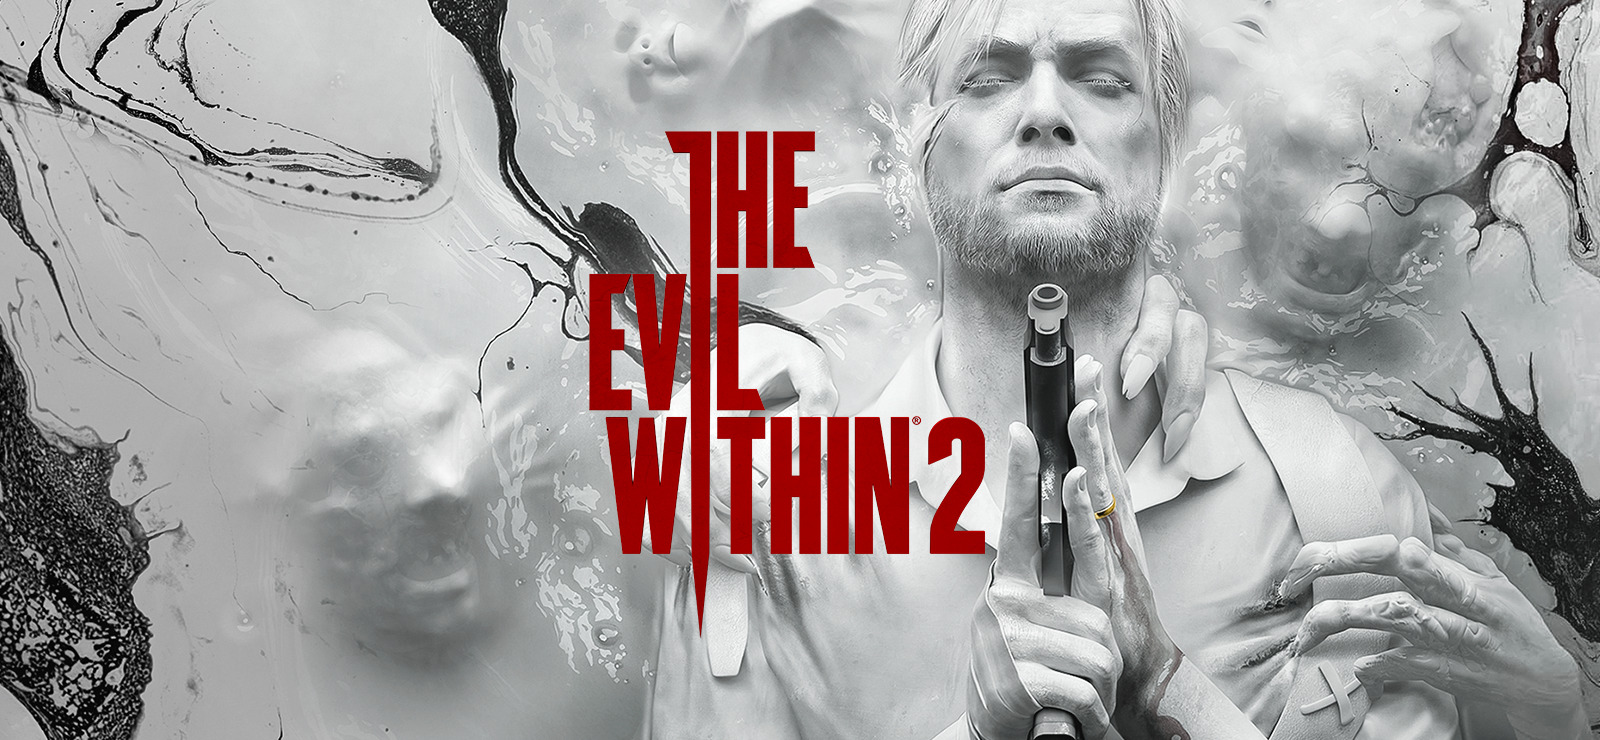 The Evil Within - Metacritic